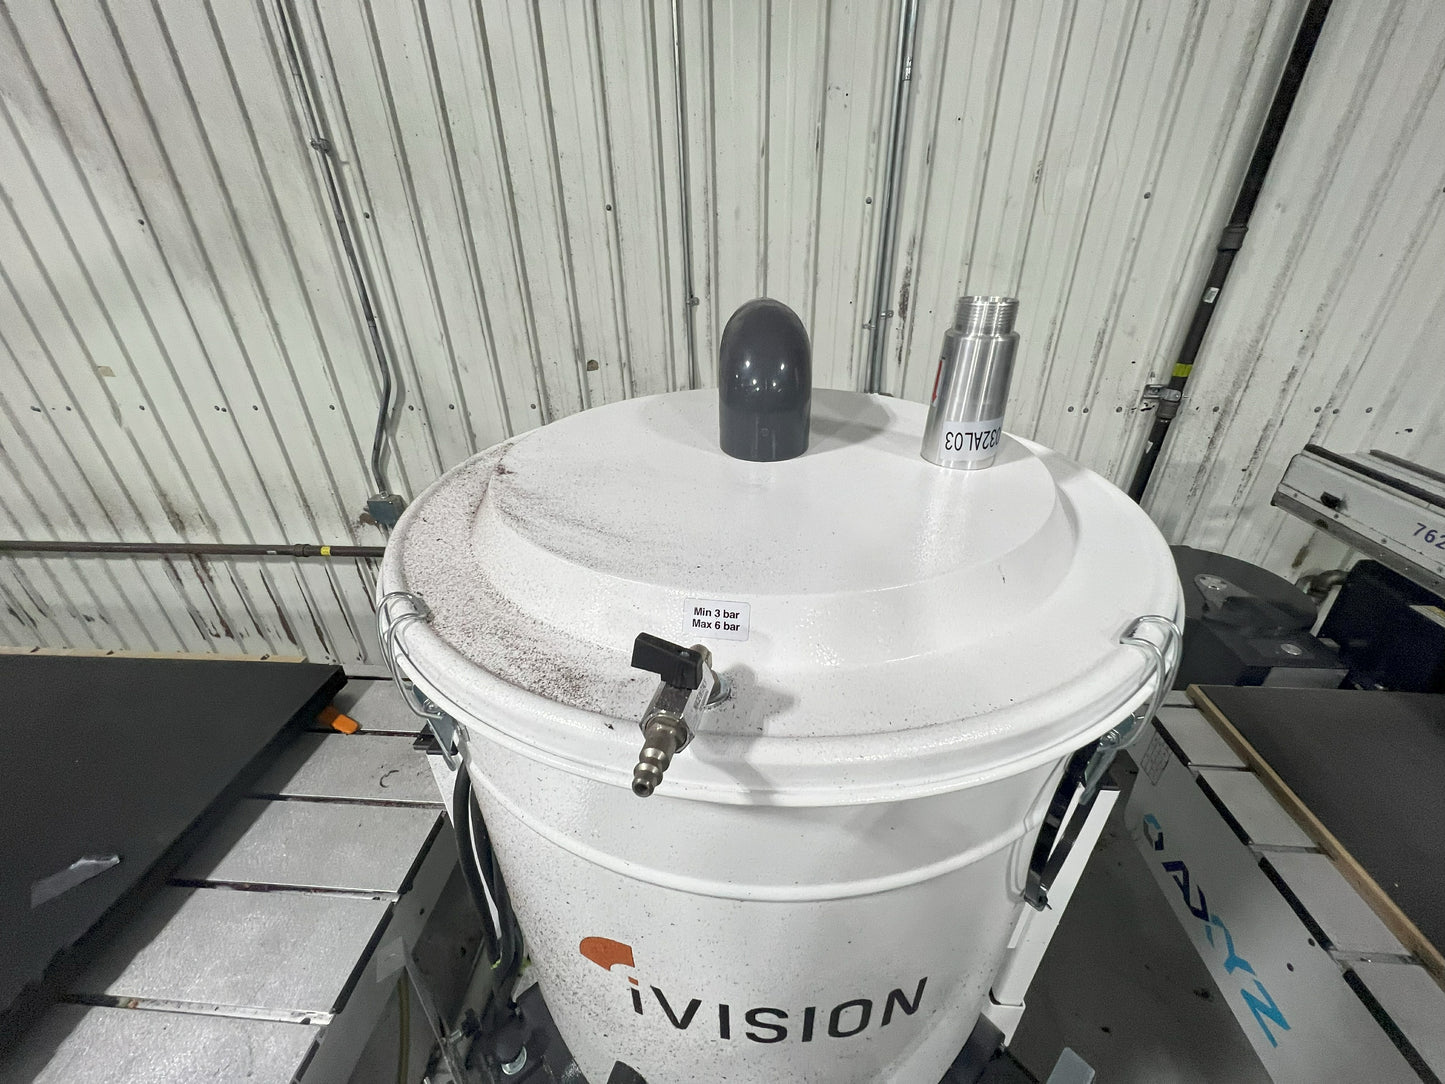 IVISION DUST COLLECTOR MODEL FLAT IV3-4.8-42-226 (S/N I-0407/2021)